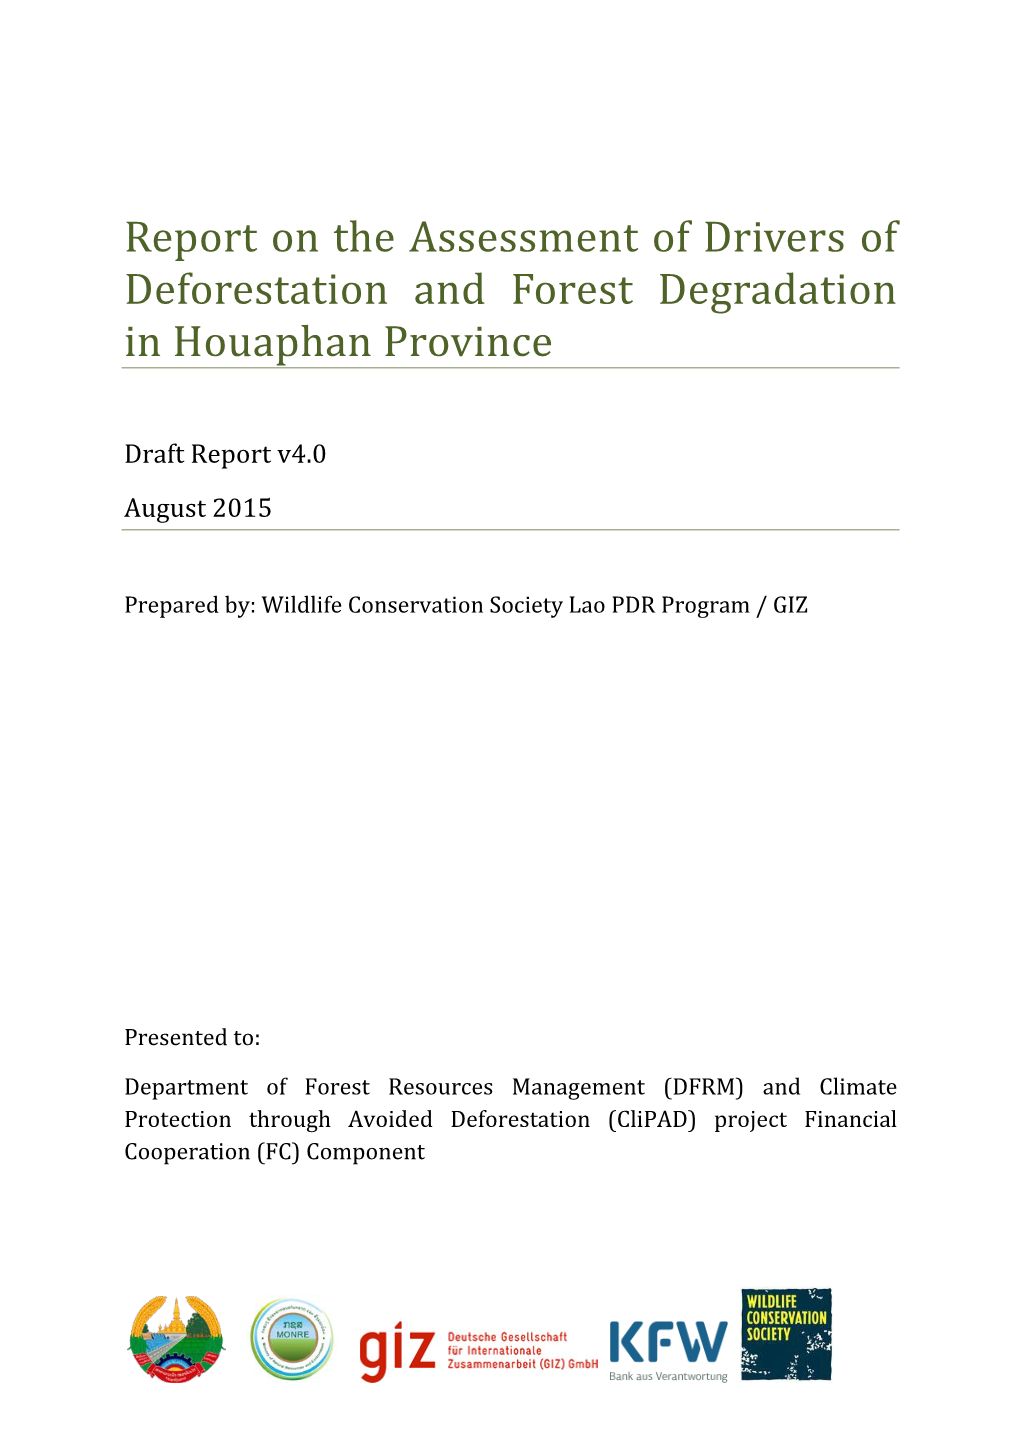 Report on the Assessment of Drivers of Deforestation and Forest Degradation in Houaphan Province